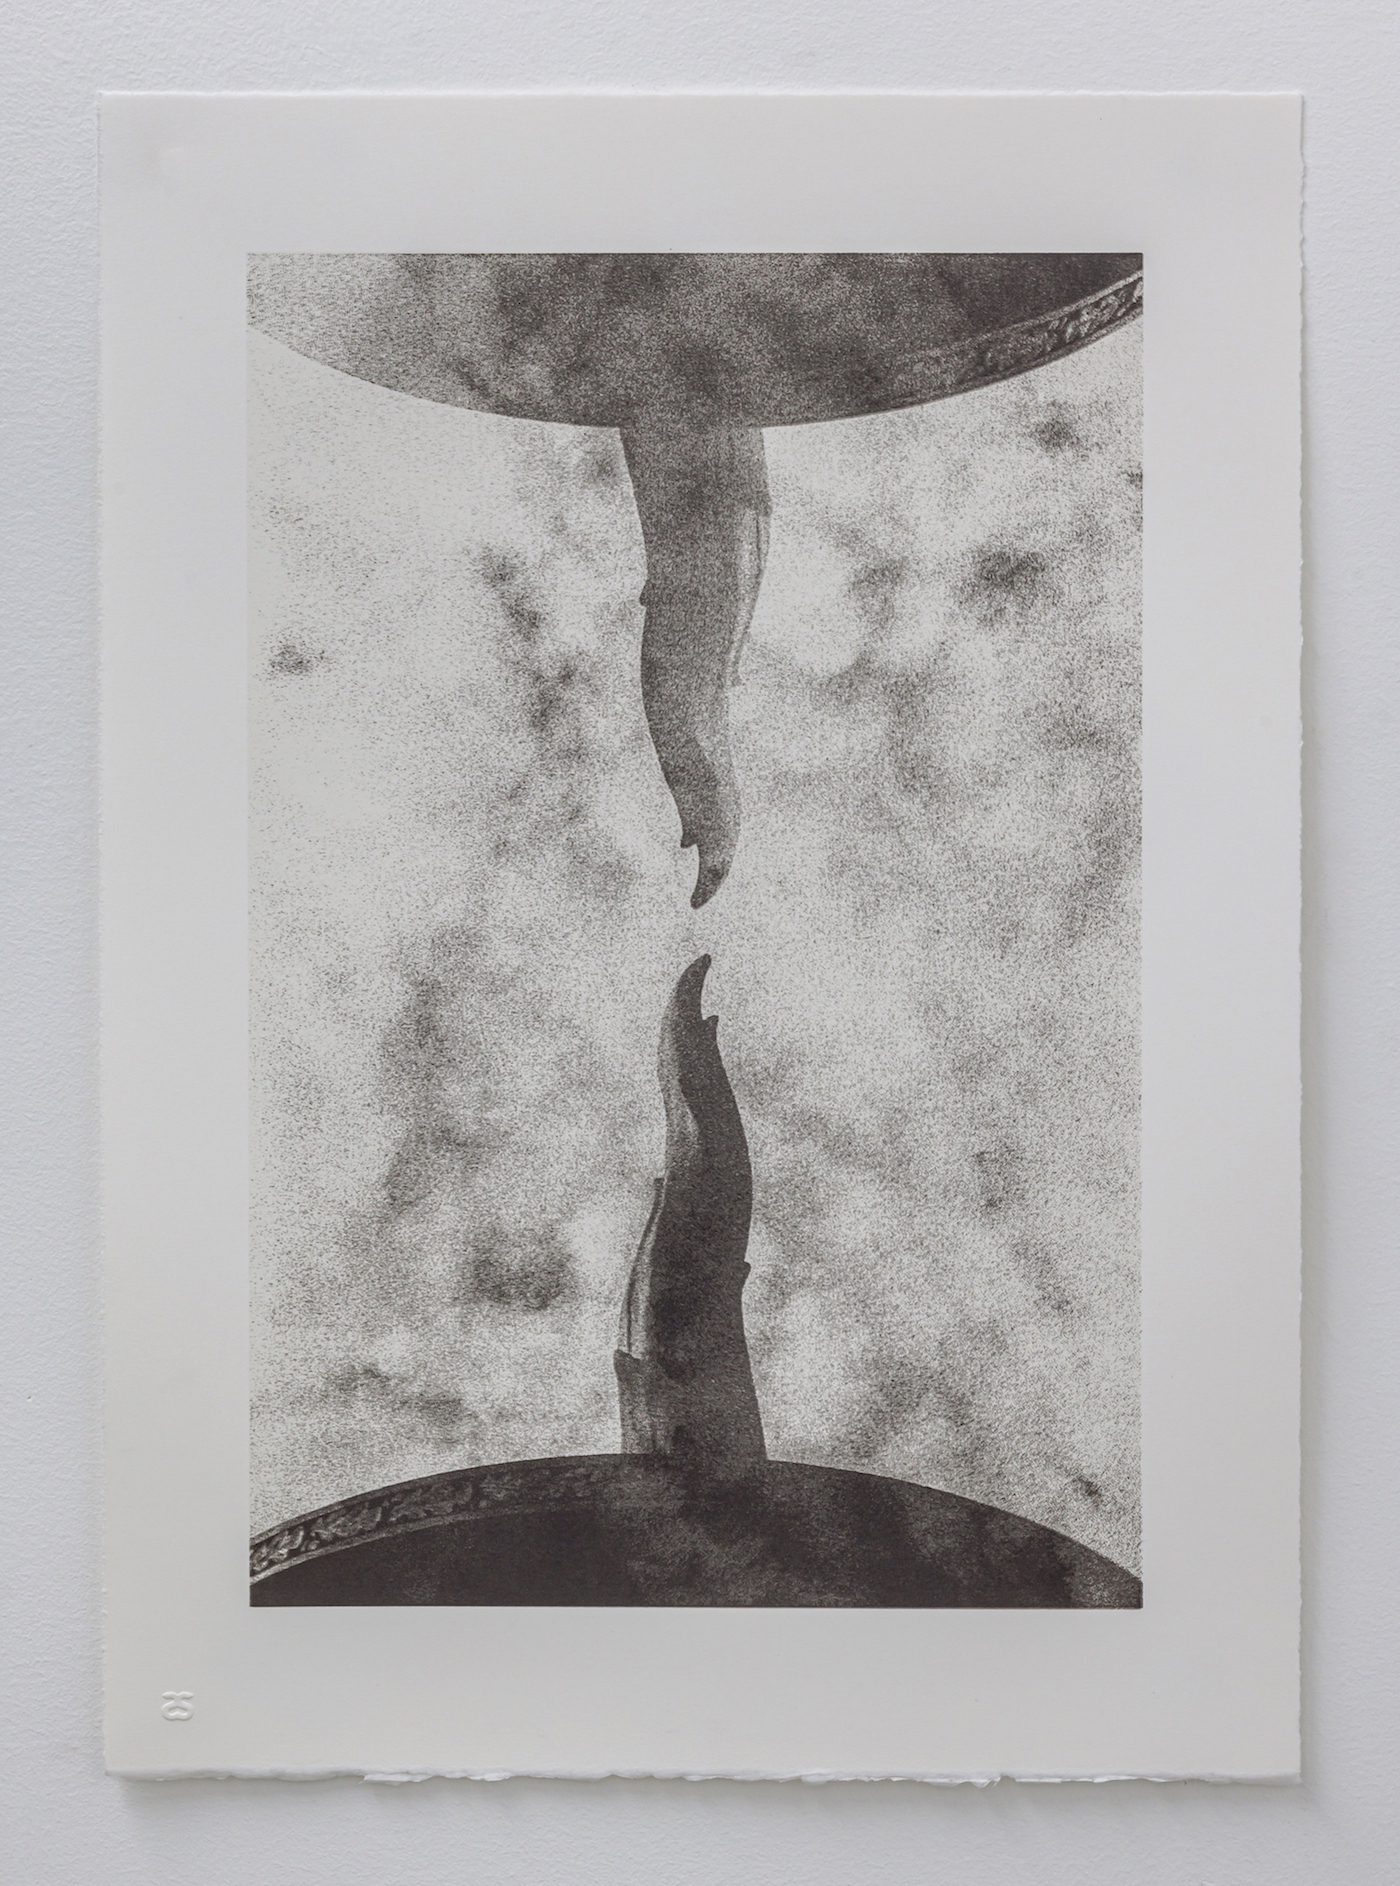 Mark Dudiak; “Hourglass”; 2021; Silkscreen print; acrylic pigment ink on arches 88 archival cotton paper.  Edition of 7 with 2 artist proofs, produced by Smokestack printers, Hamilton ON;  14.5” x 20.25”